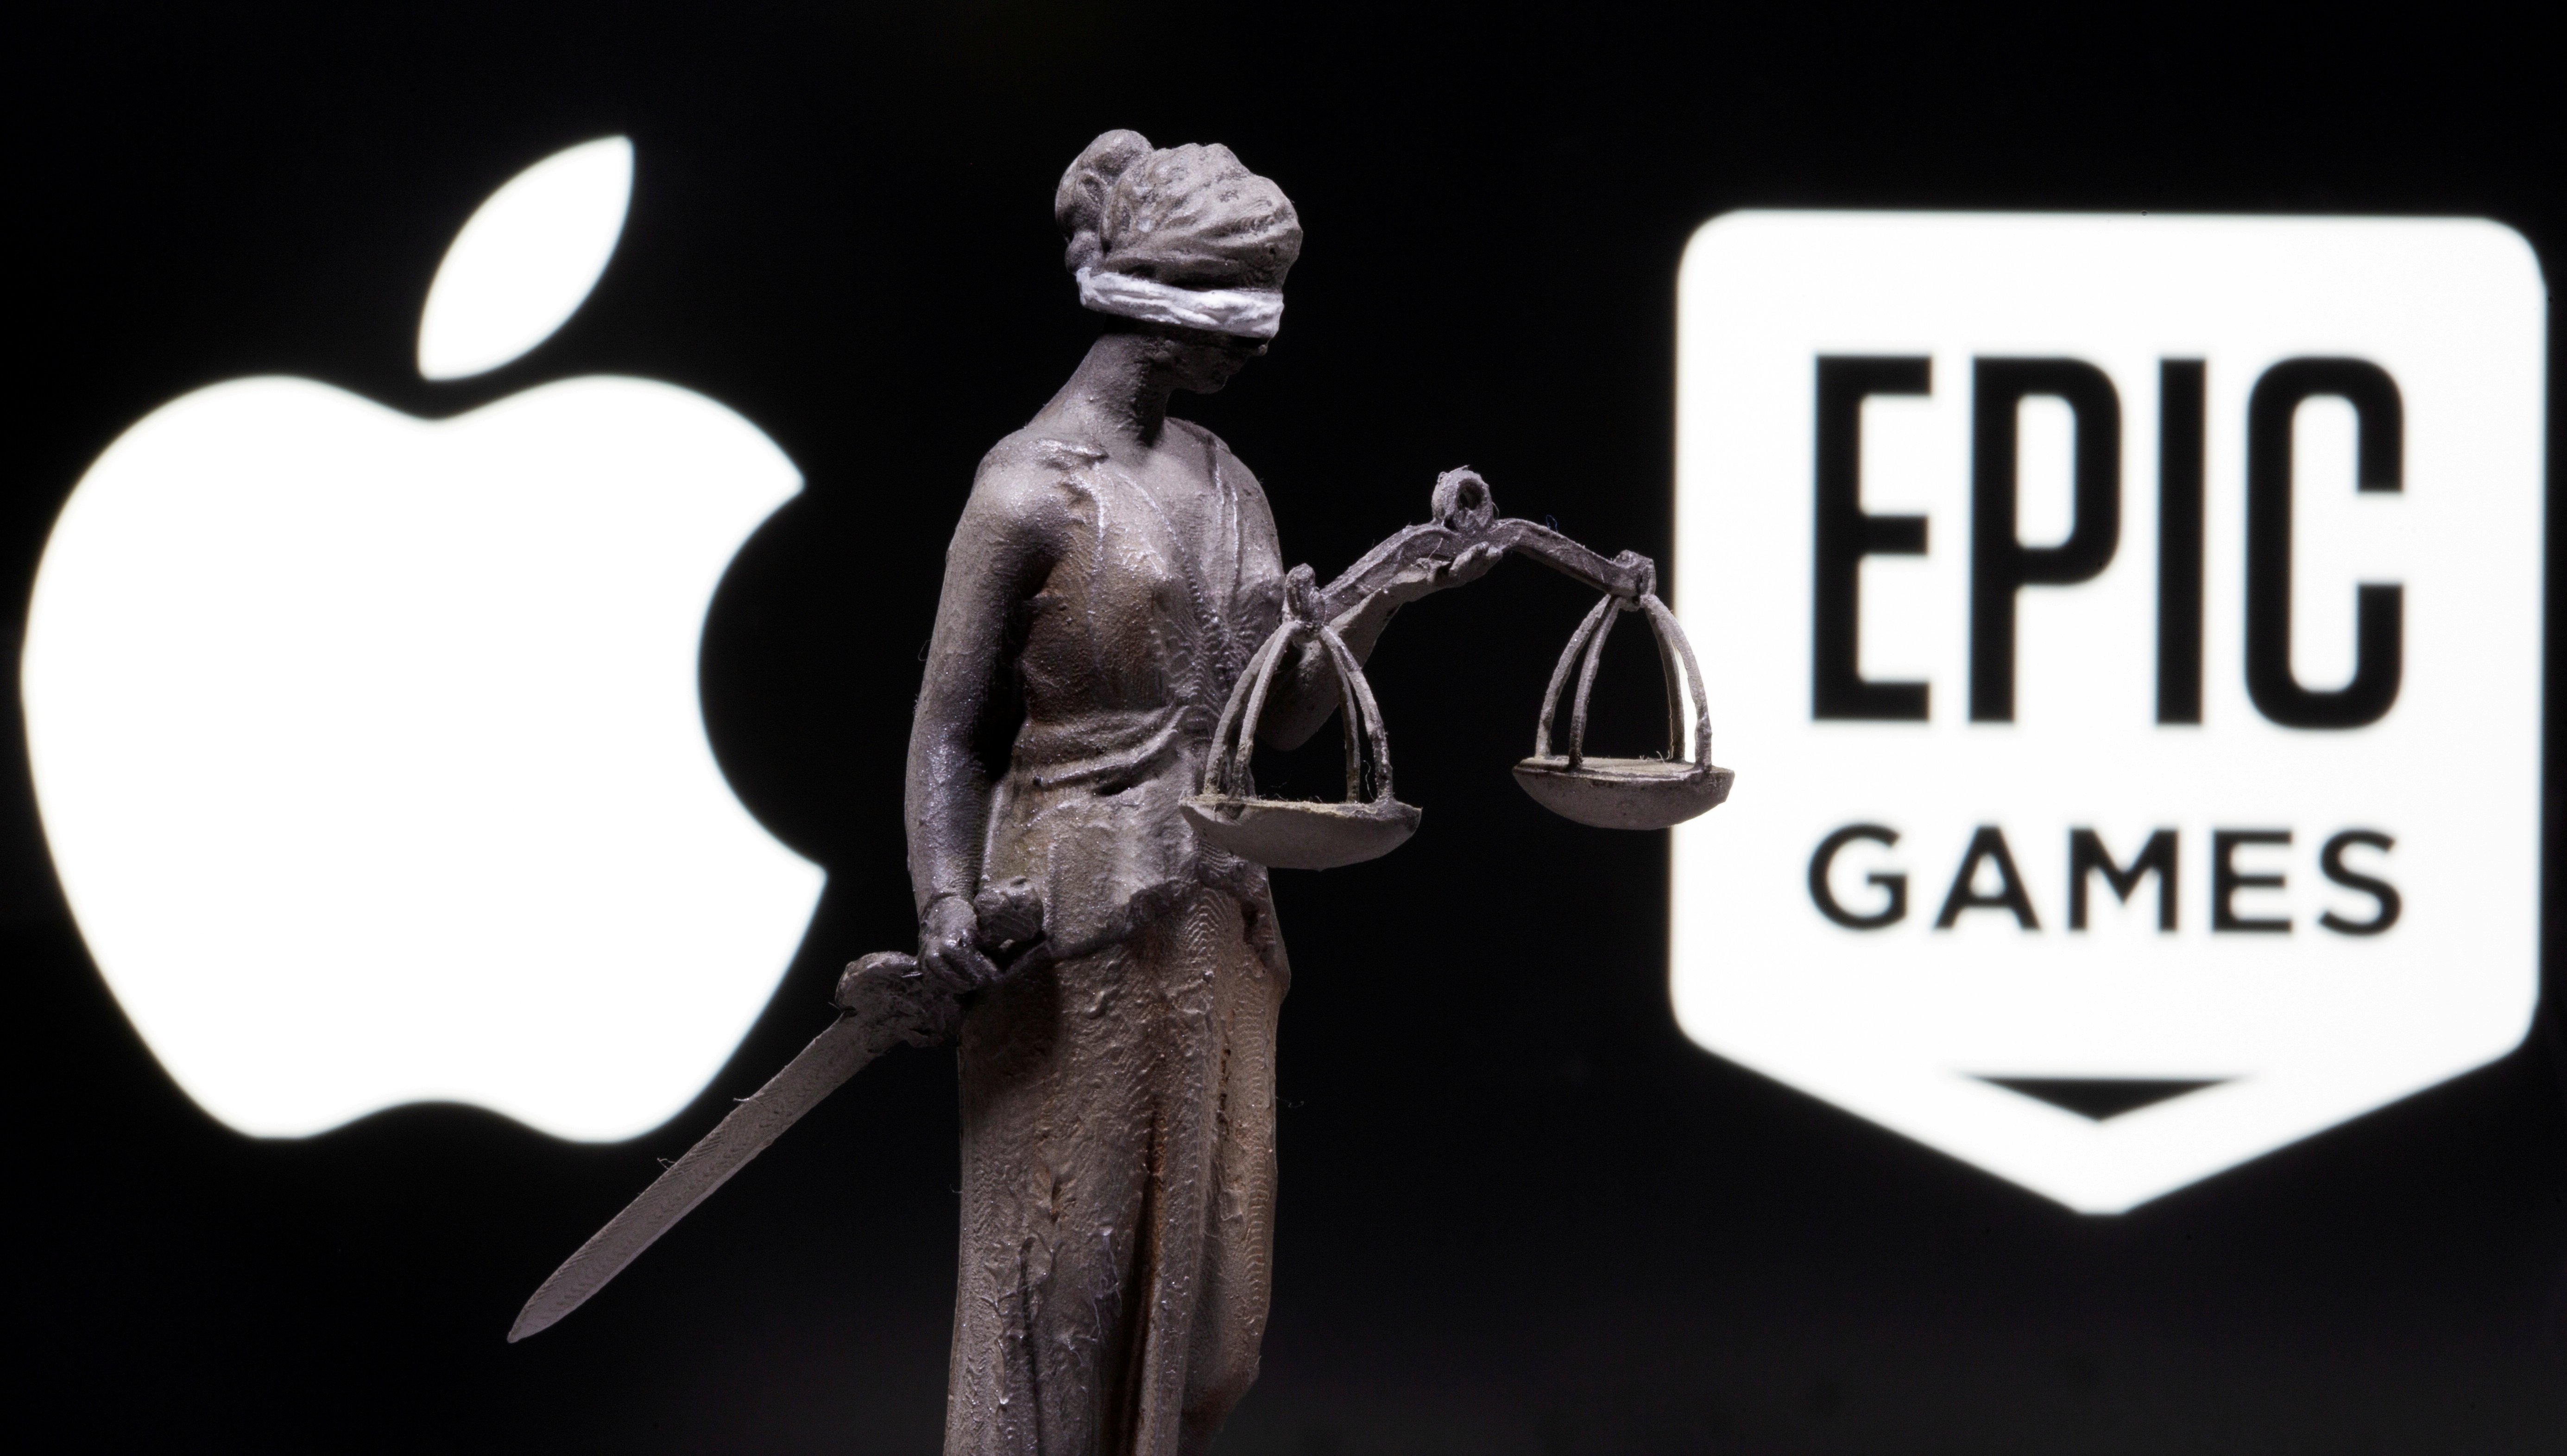 Epic Lost Trial Due to Flawed Argument, Not Legal Error, Apple